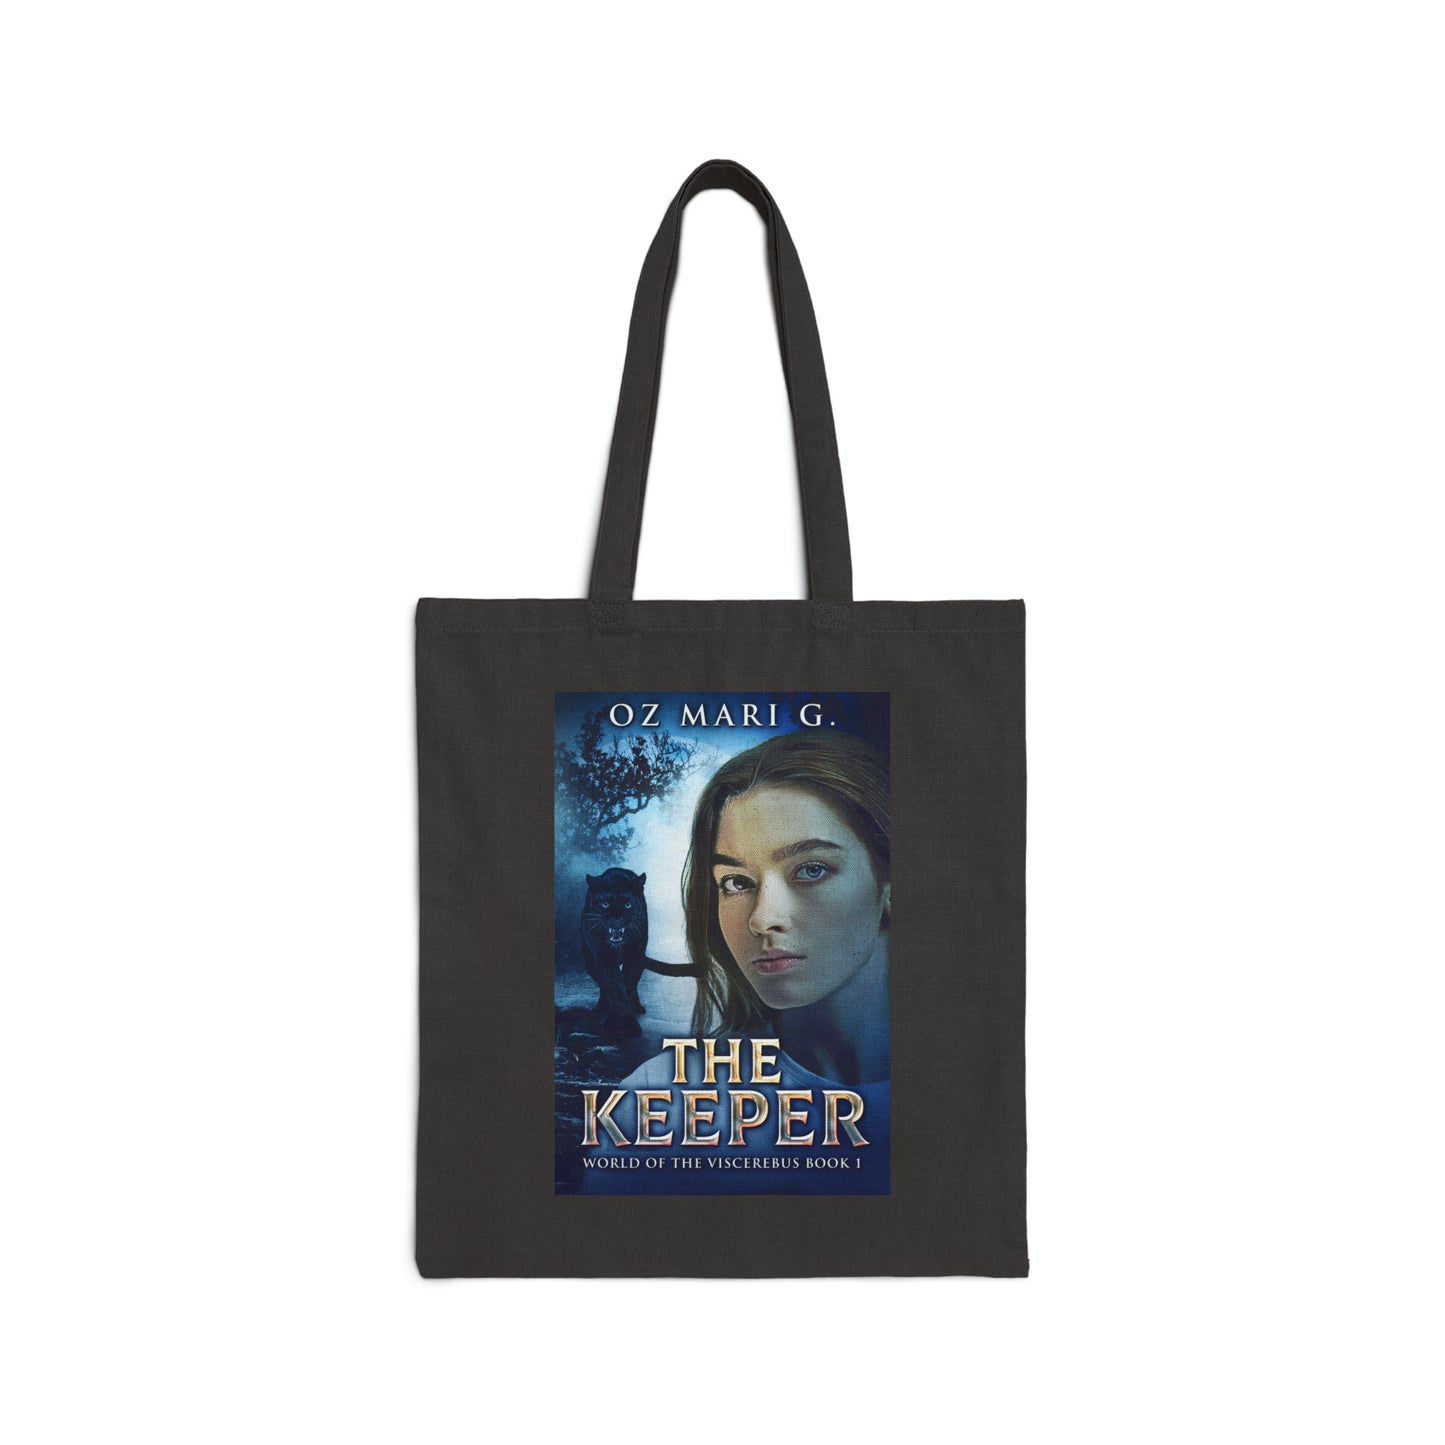 The Keeper - Cotton Canvas Tote Bag